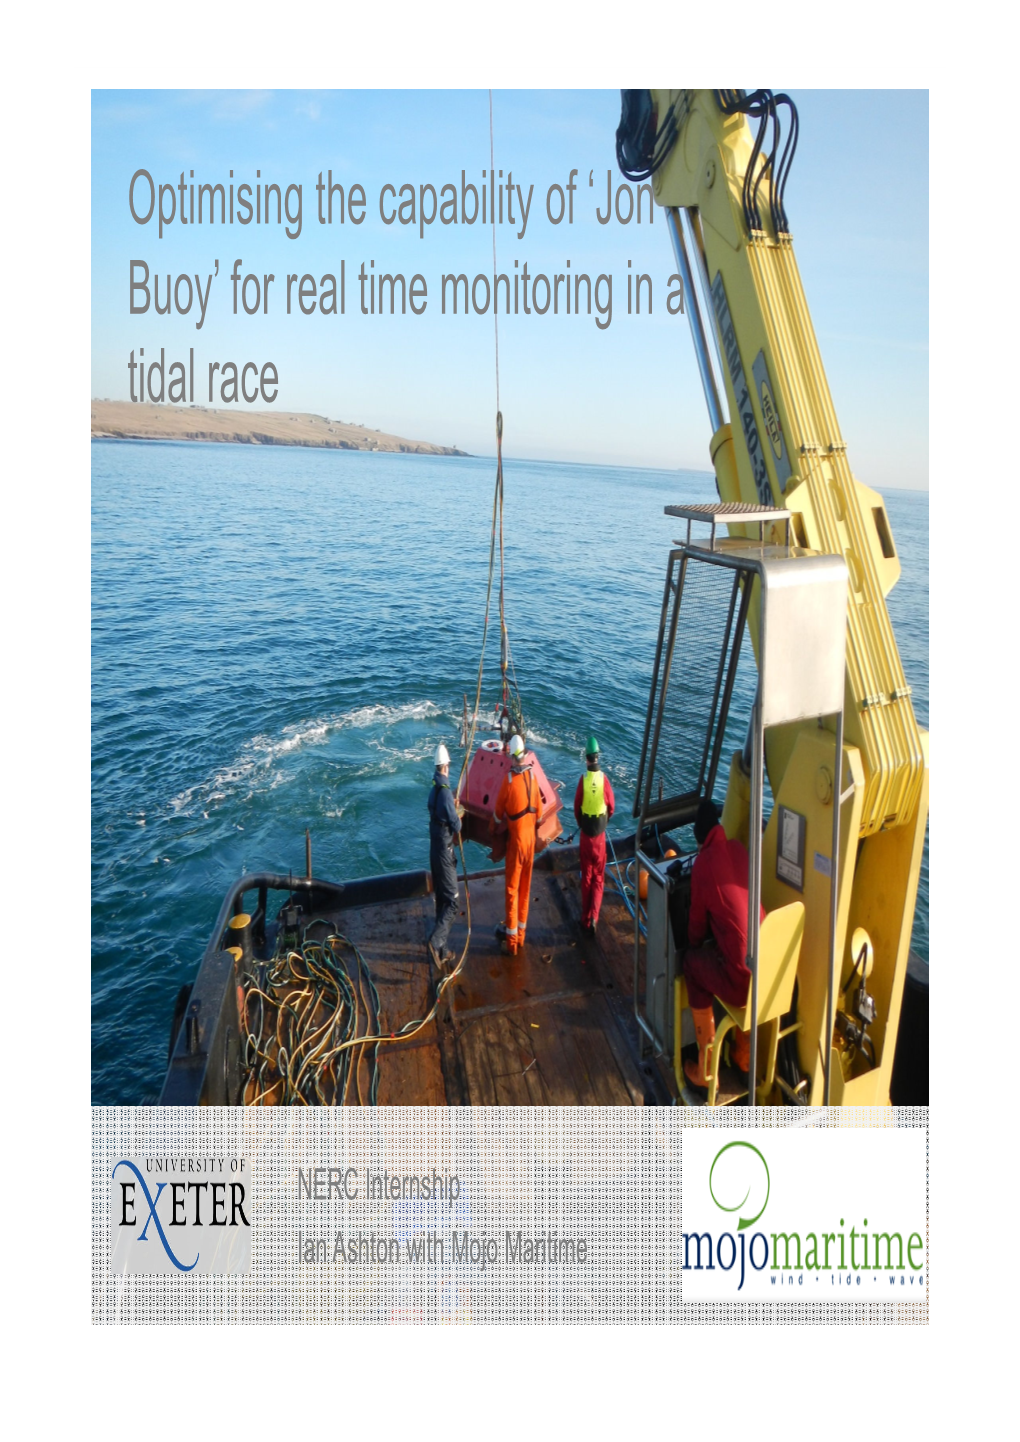 Optimising the Capability of 'Jon Buoy' for Real Time Monitoring in a Tidal Race